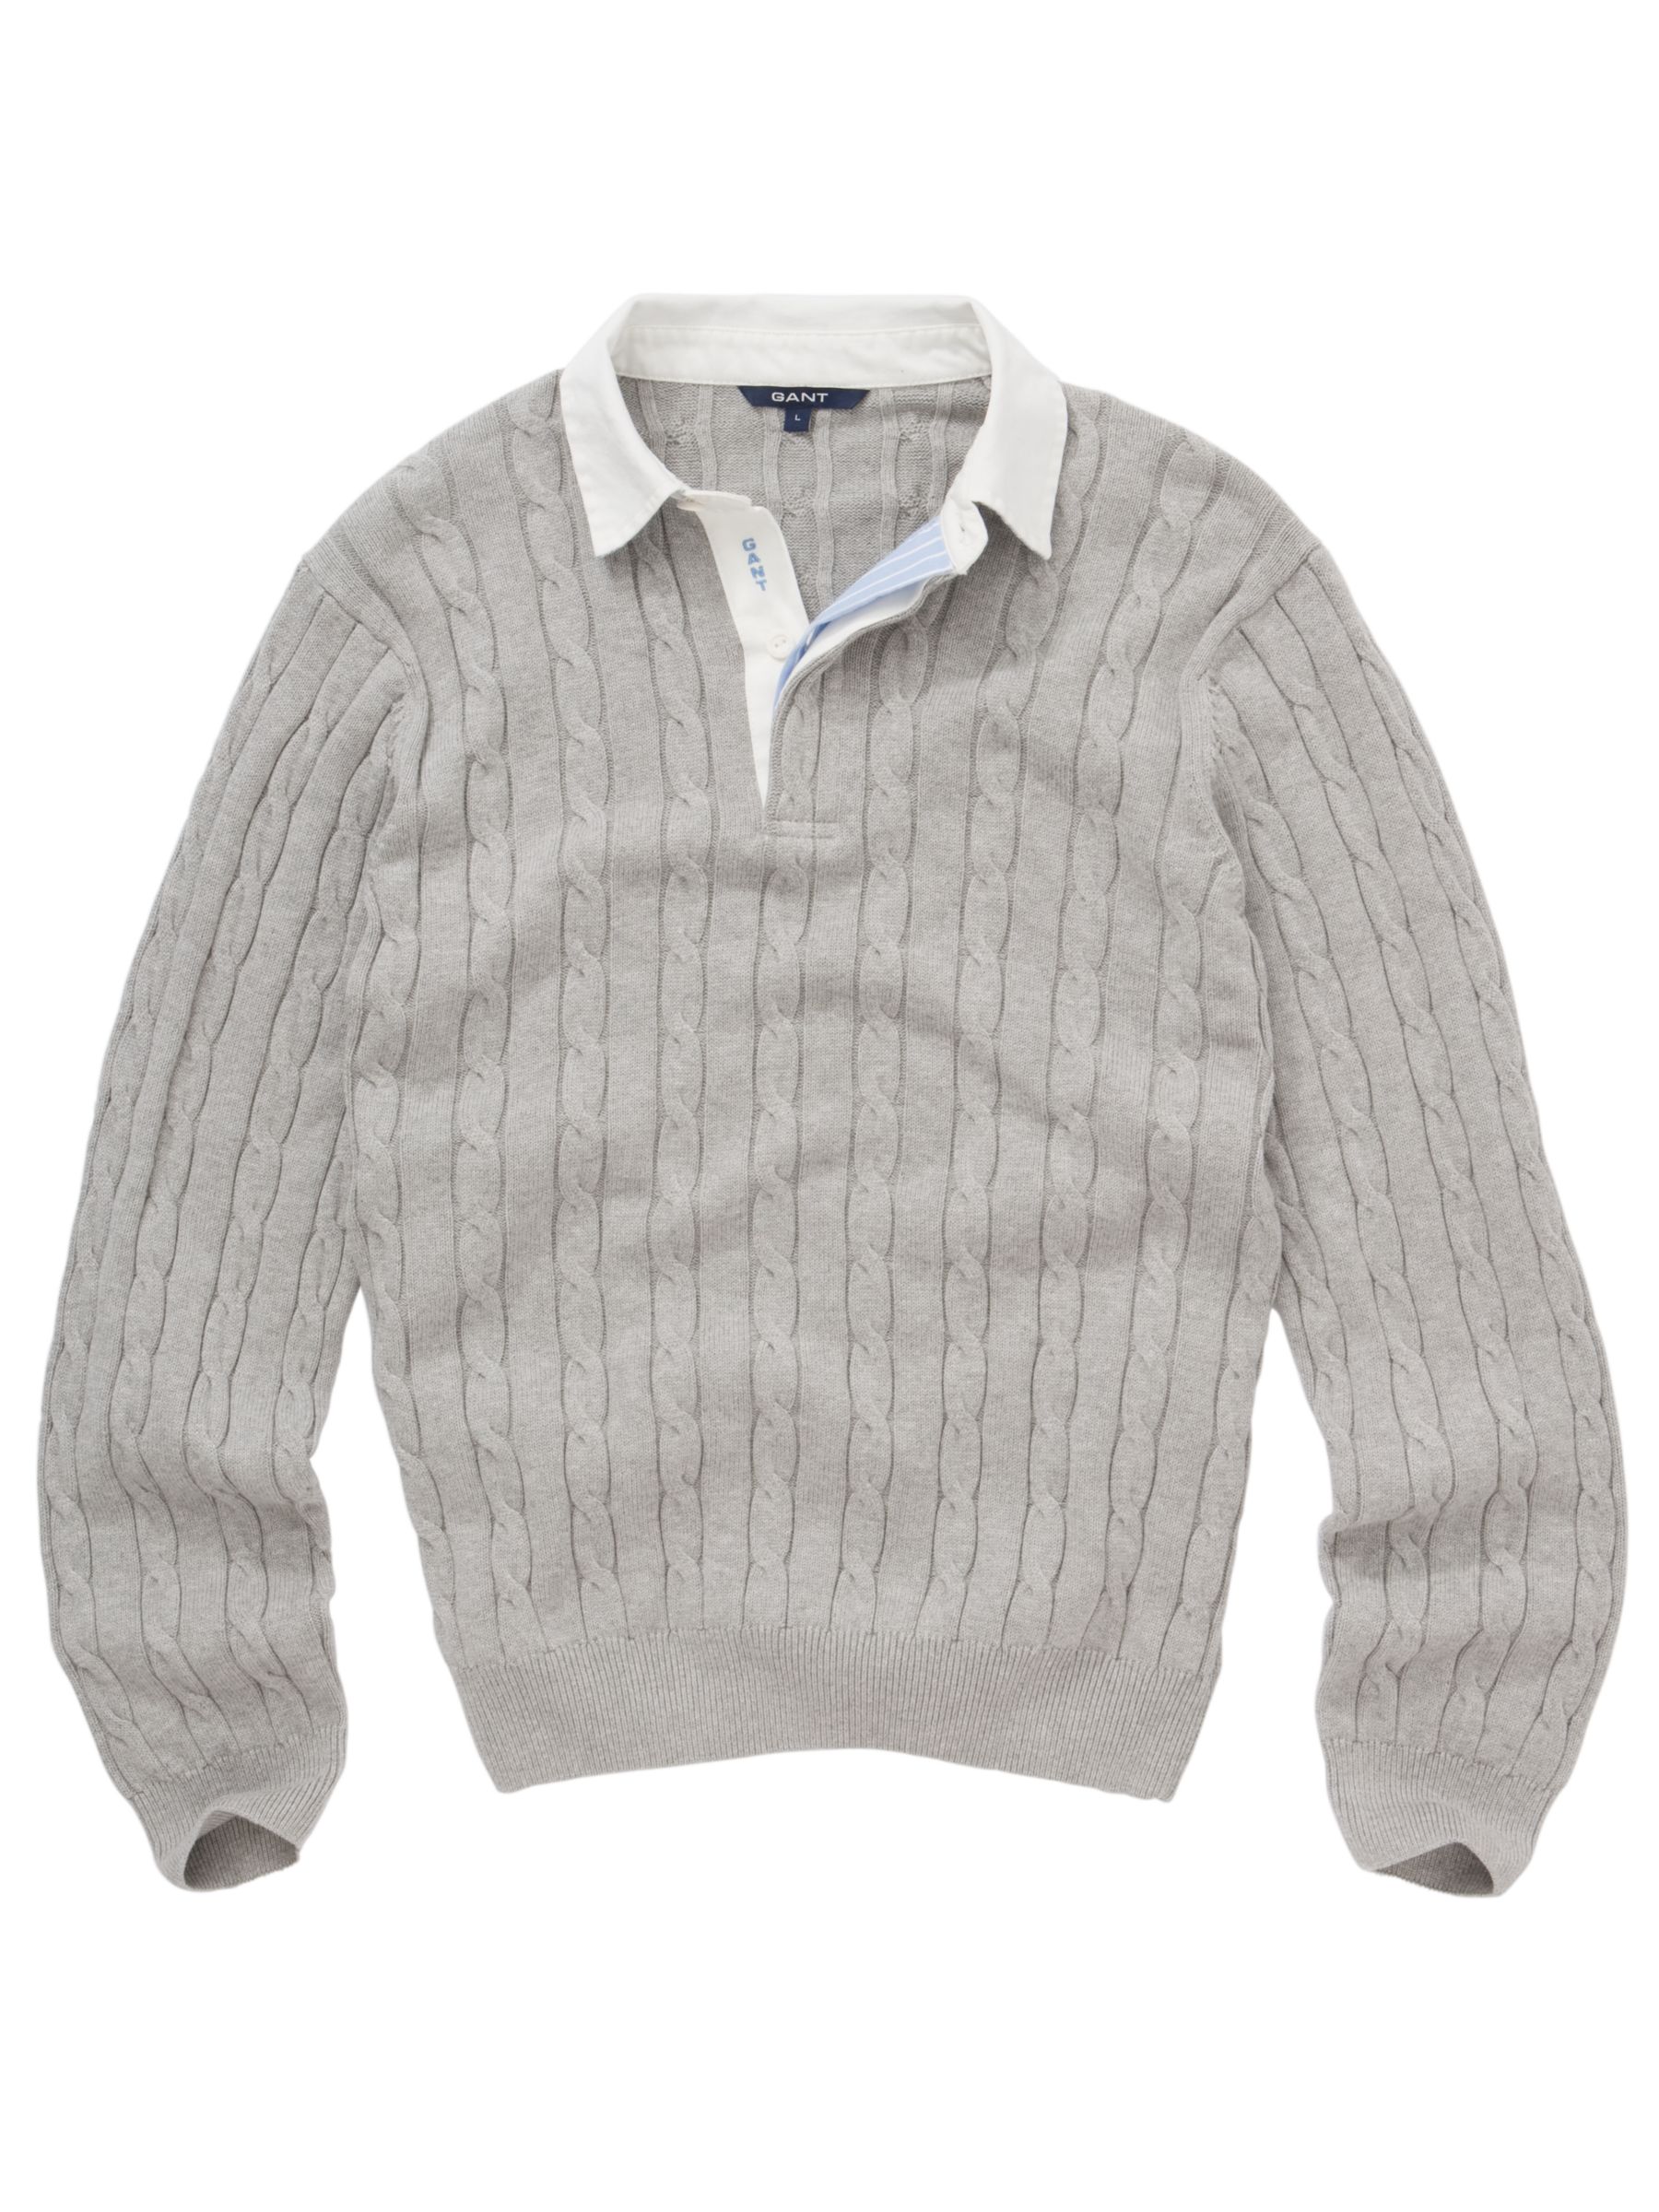 Gant Cable Knit Rugby Shirt, Grey